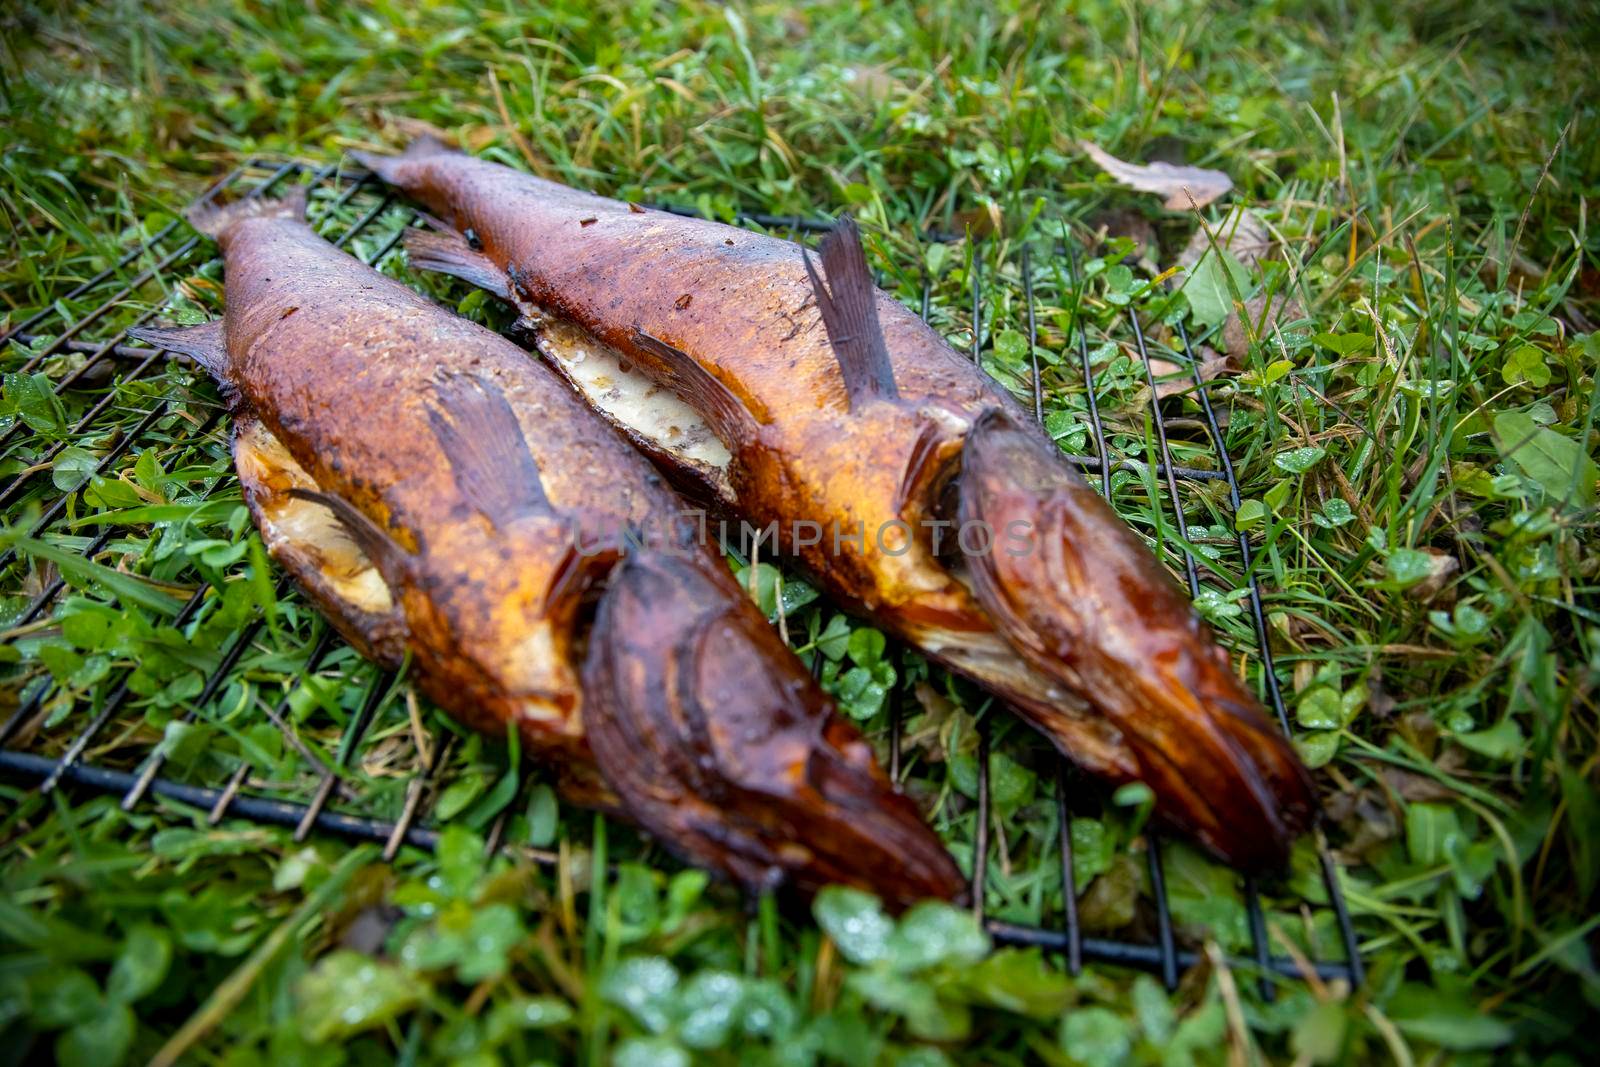 chilled river fish in smoke lies on the grate on the grass by Mariaprovector